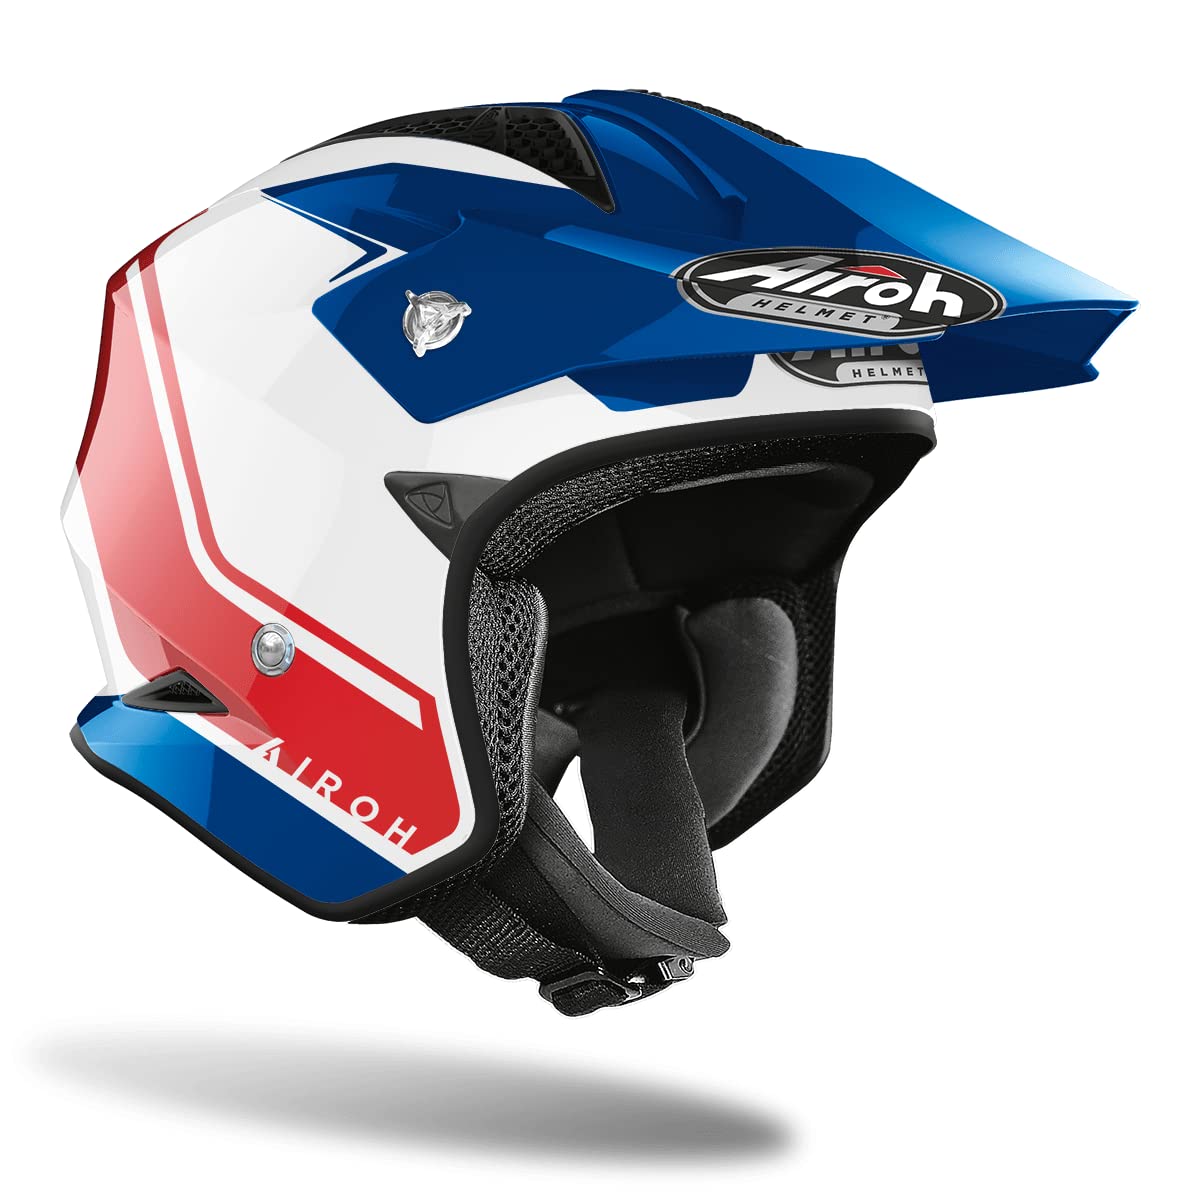 Airoh Helm TRR S KEEN BLUE/RED GLOSS XS von Airoh